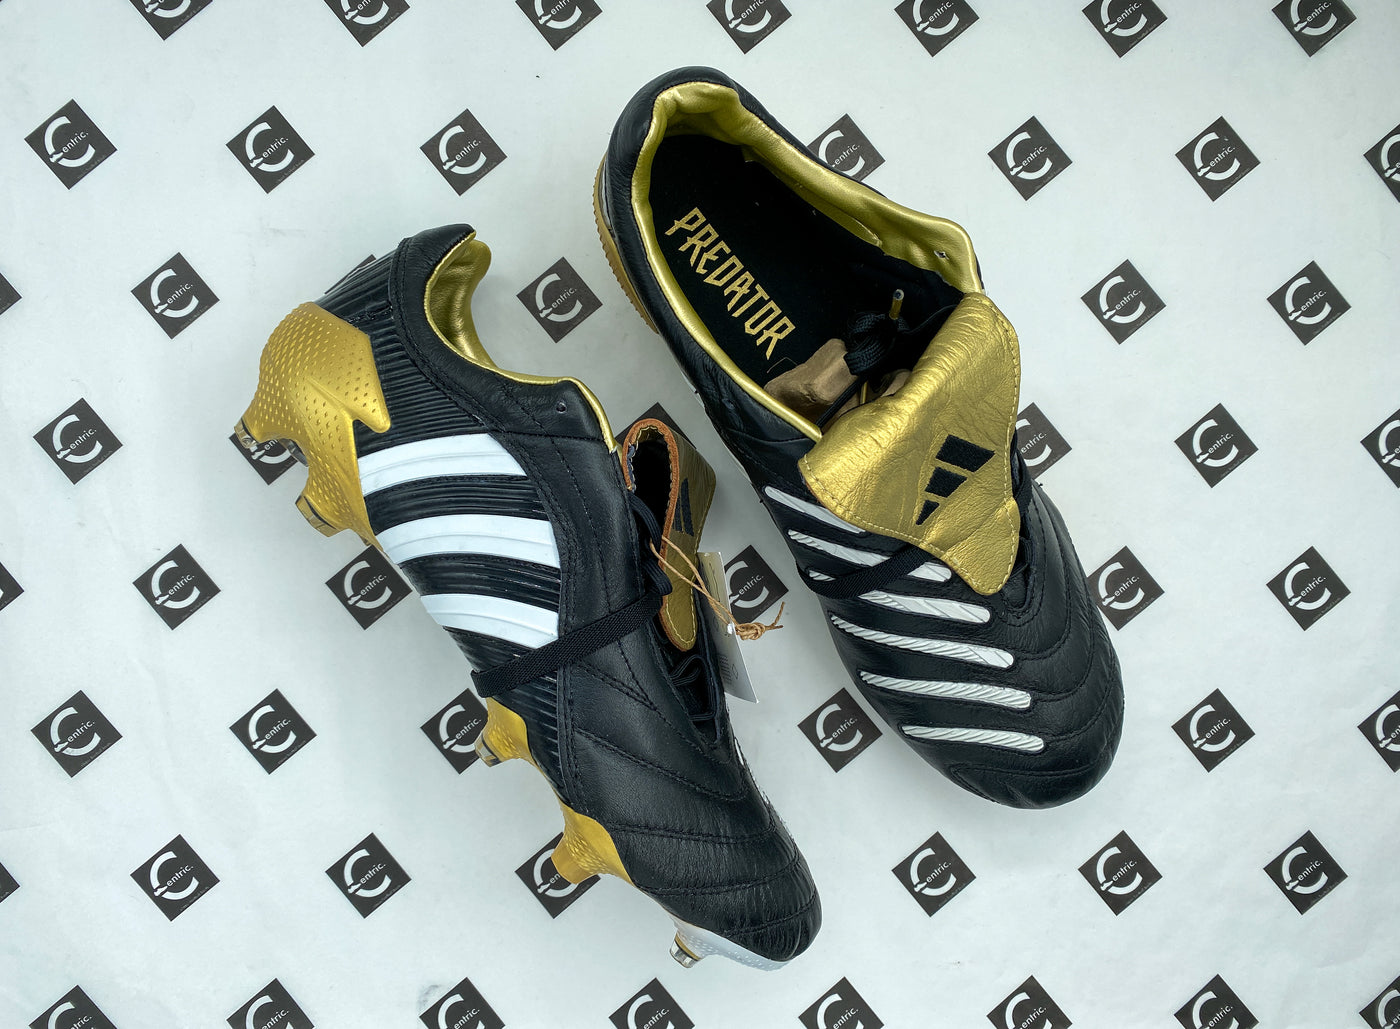 Adidas Predator Pulse x EA Sports "Legends Pack" Remake FG GOLD - Bootscentric